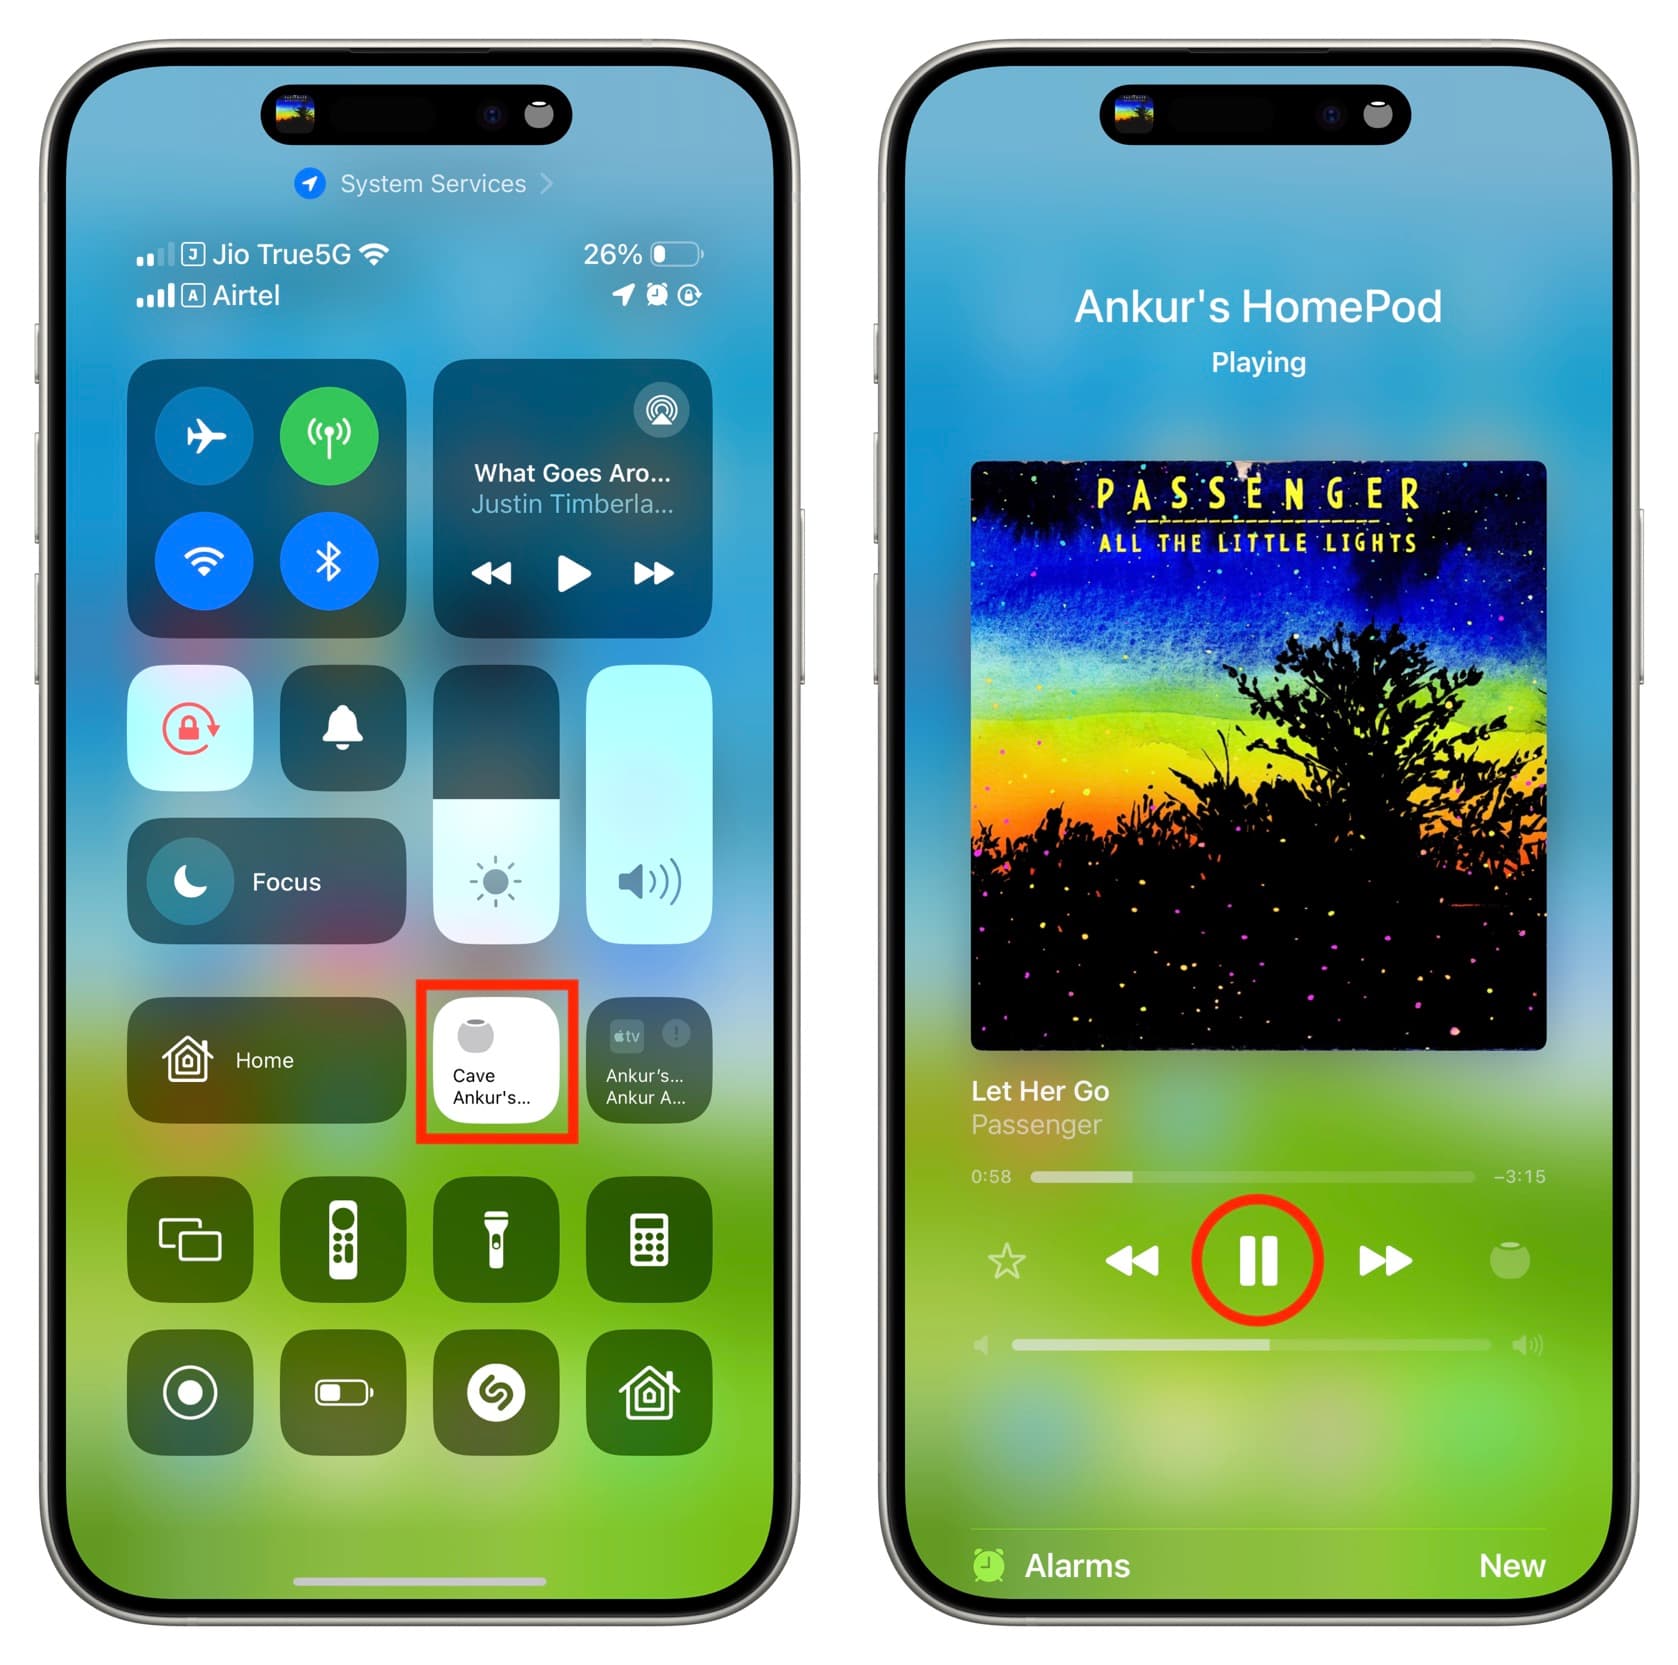 Use Home Controls in iPhone Control Center to pause and resume music on HomePod